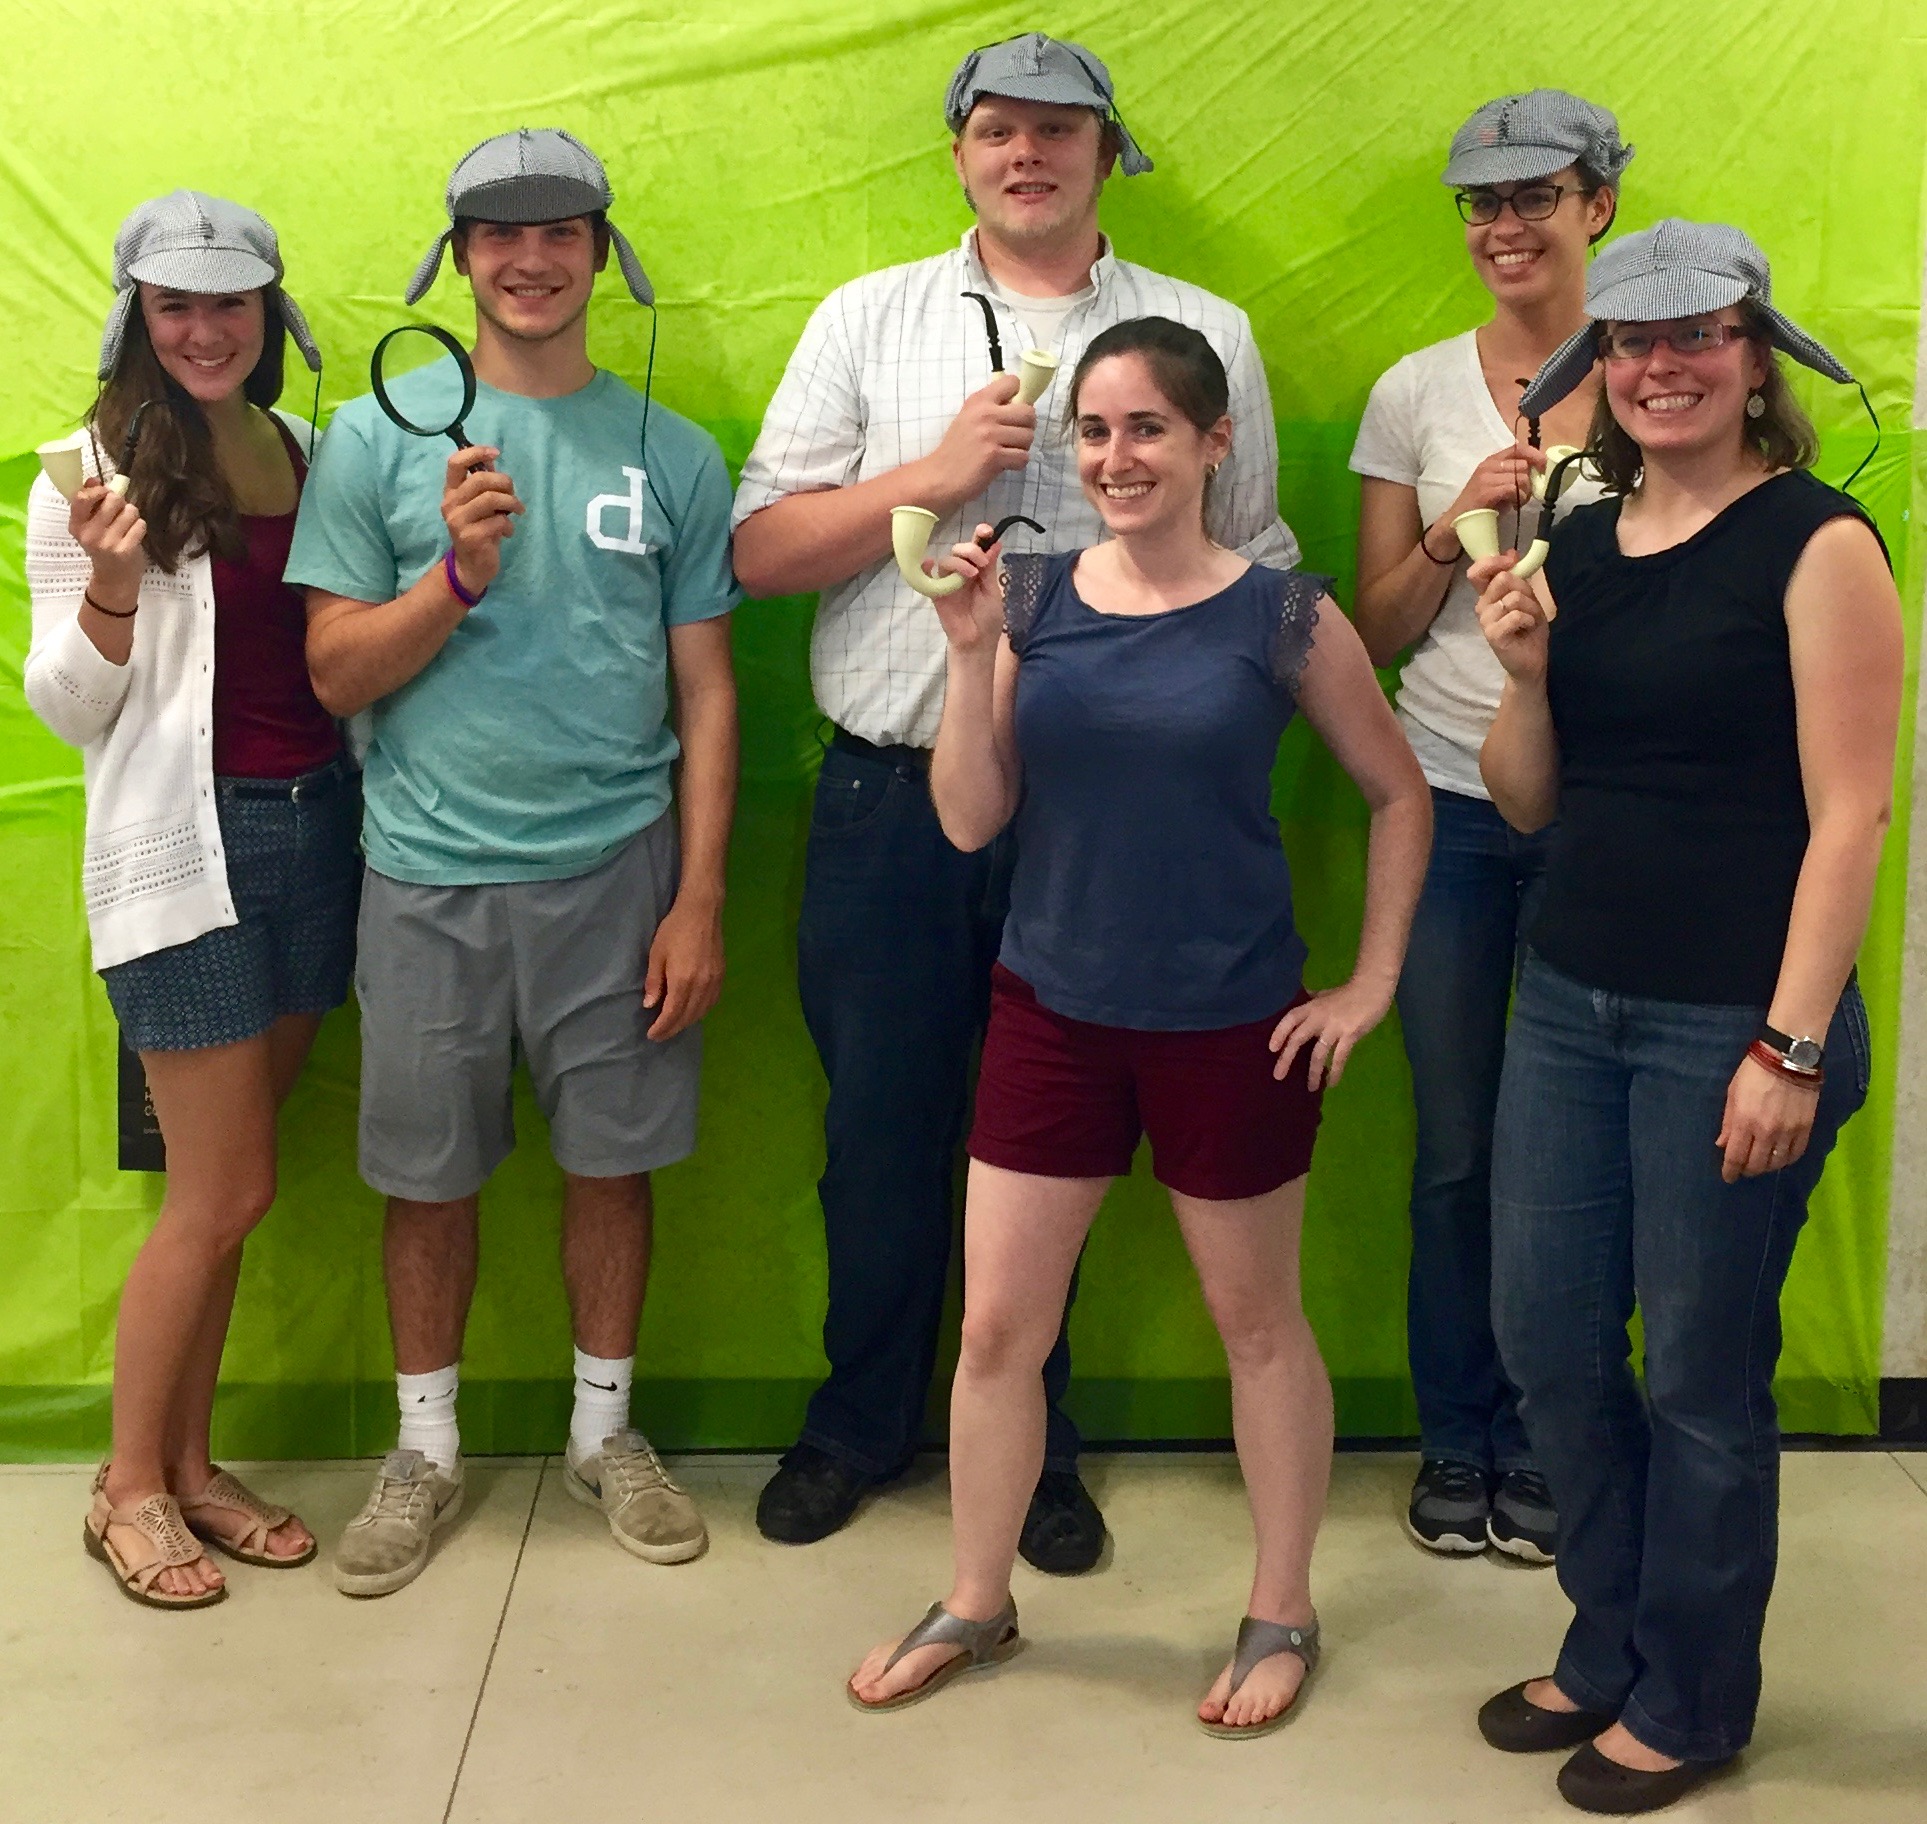 Hurley lab in detective hats holding magnifying glasses and large pipes